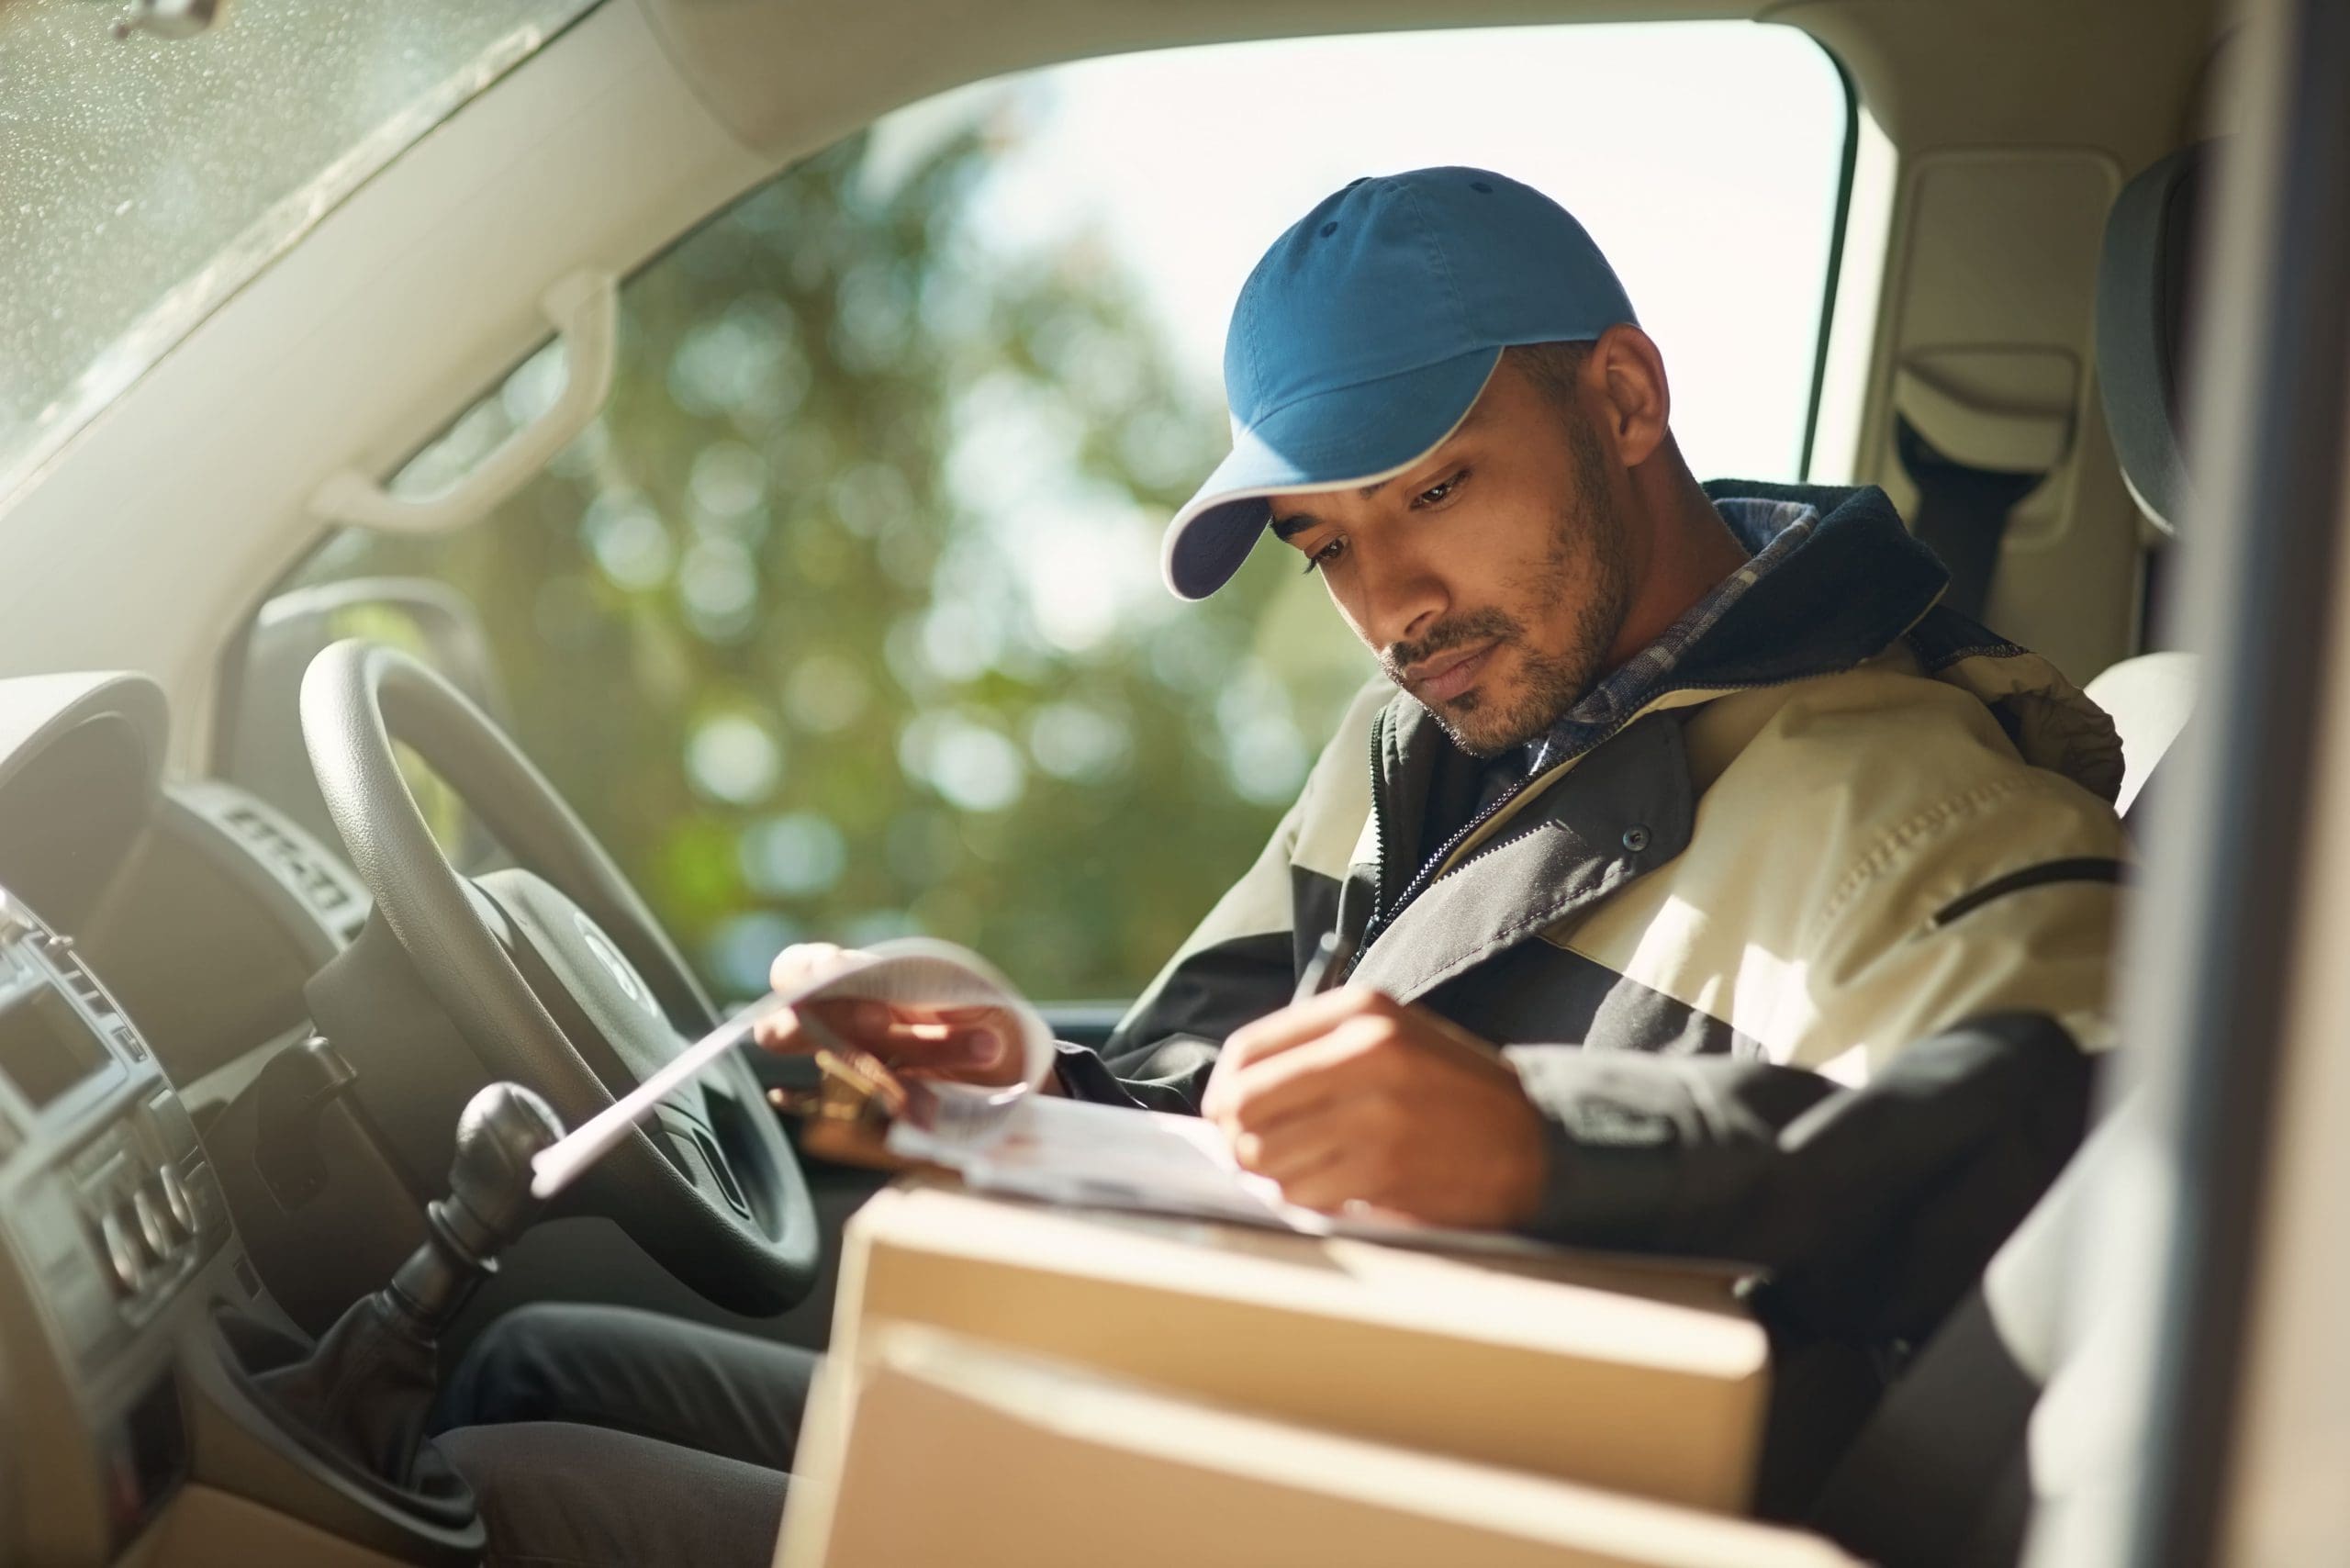 How Can Rising Pressures Affect the Mental Health of Delivery Drivers?